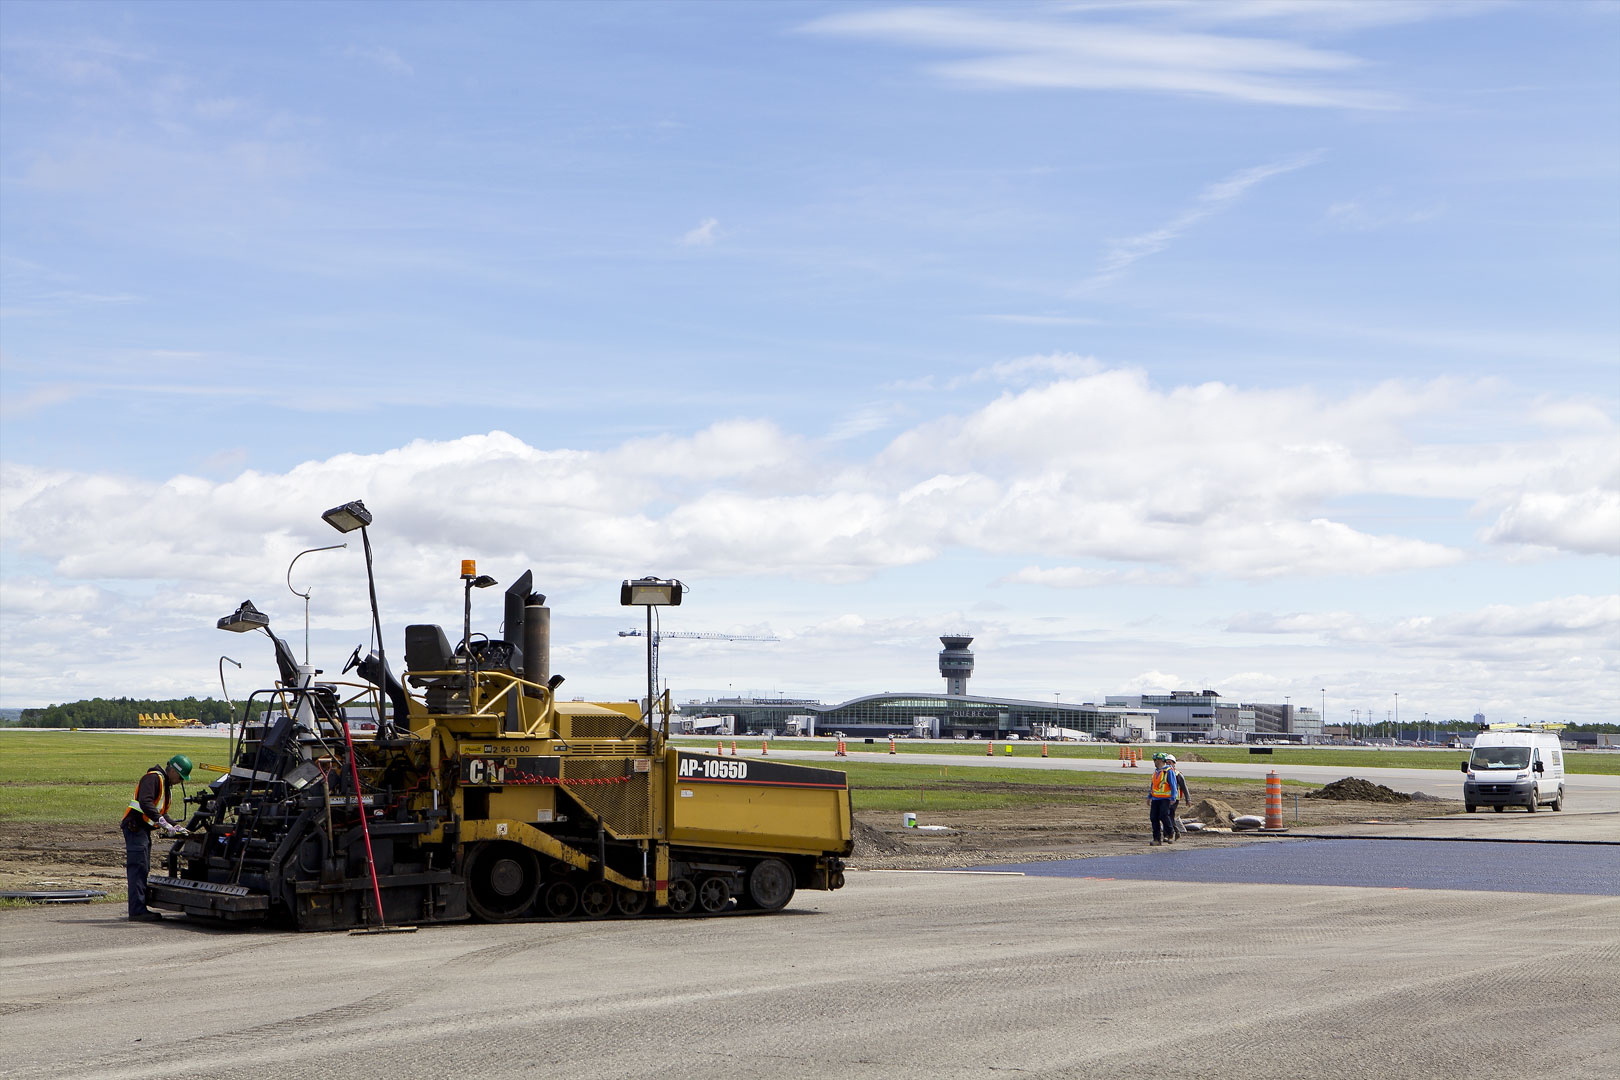 Machinery for paving work on the airfield of Québec City Jean Lesage International Airport (YQB)